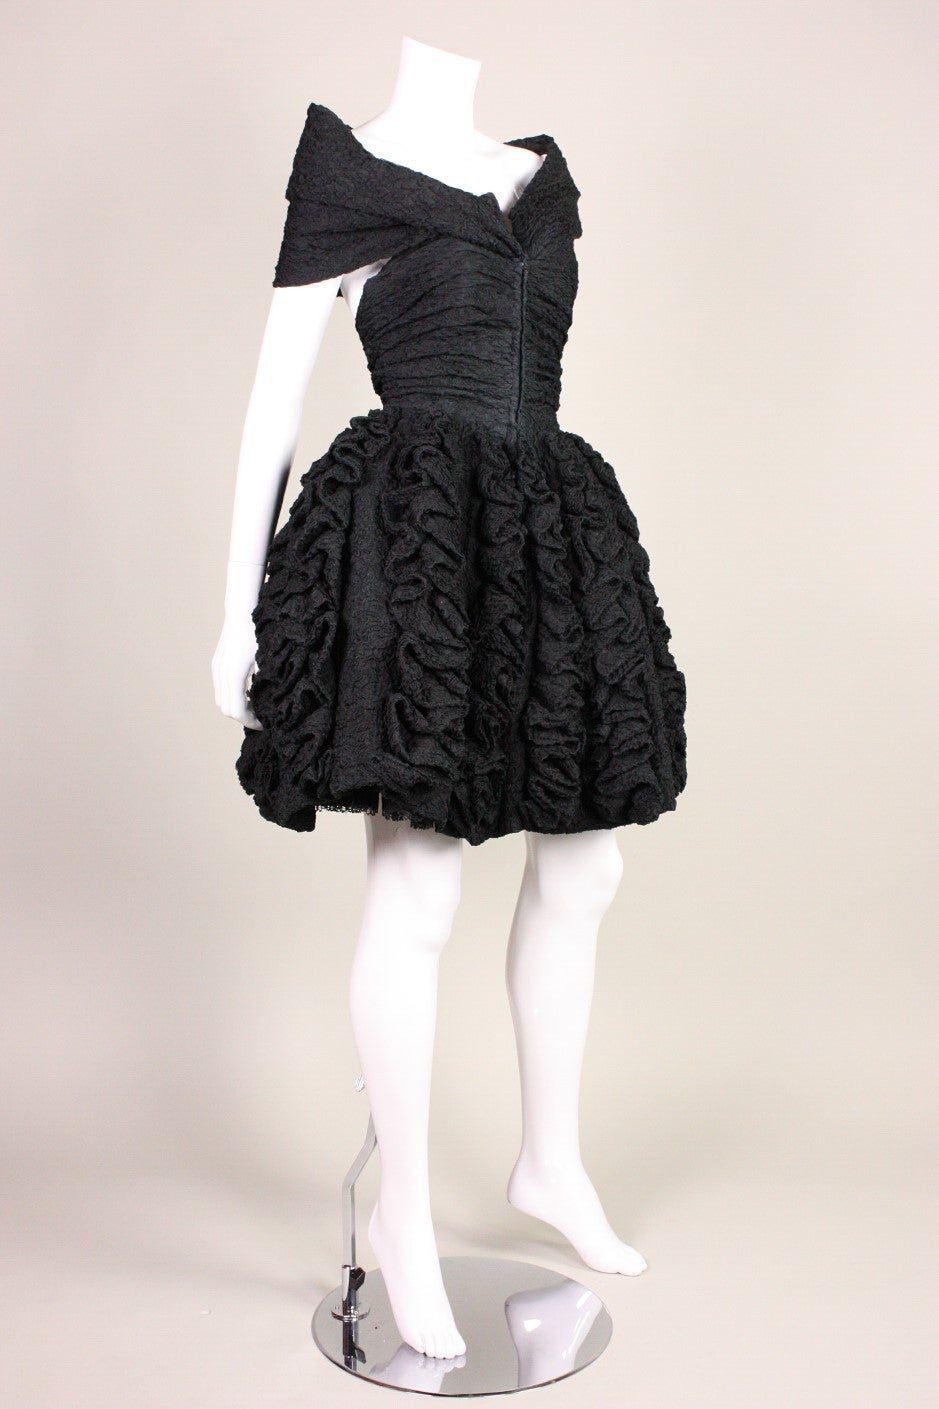 Vintage cocktail dress from Christian Lacroix dates to the 1990's and is made of crinkled black silk.  Boned bodice has horizontal ruching and fabric attached at the center front bust that creates a shawl-like collar that sits just off of the